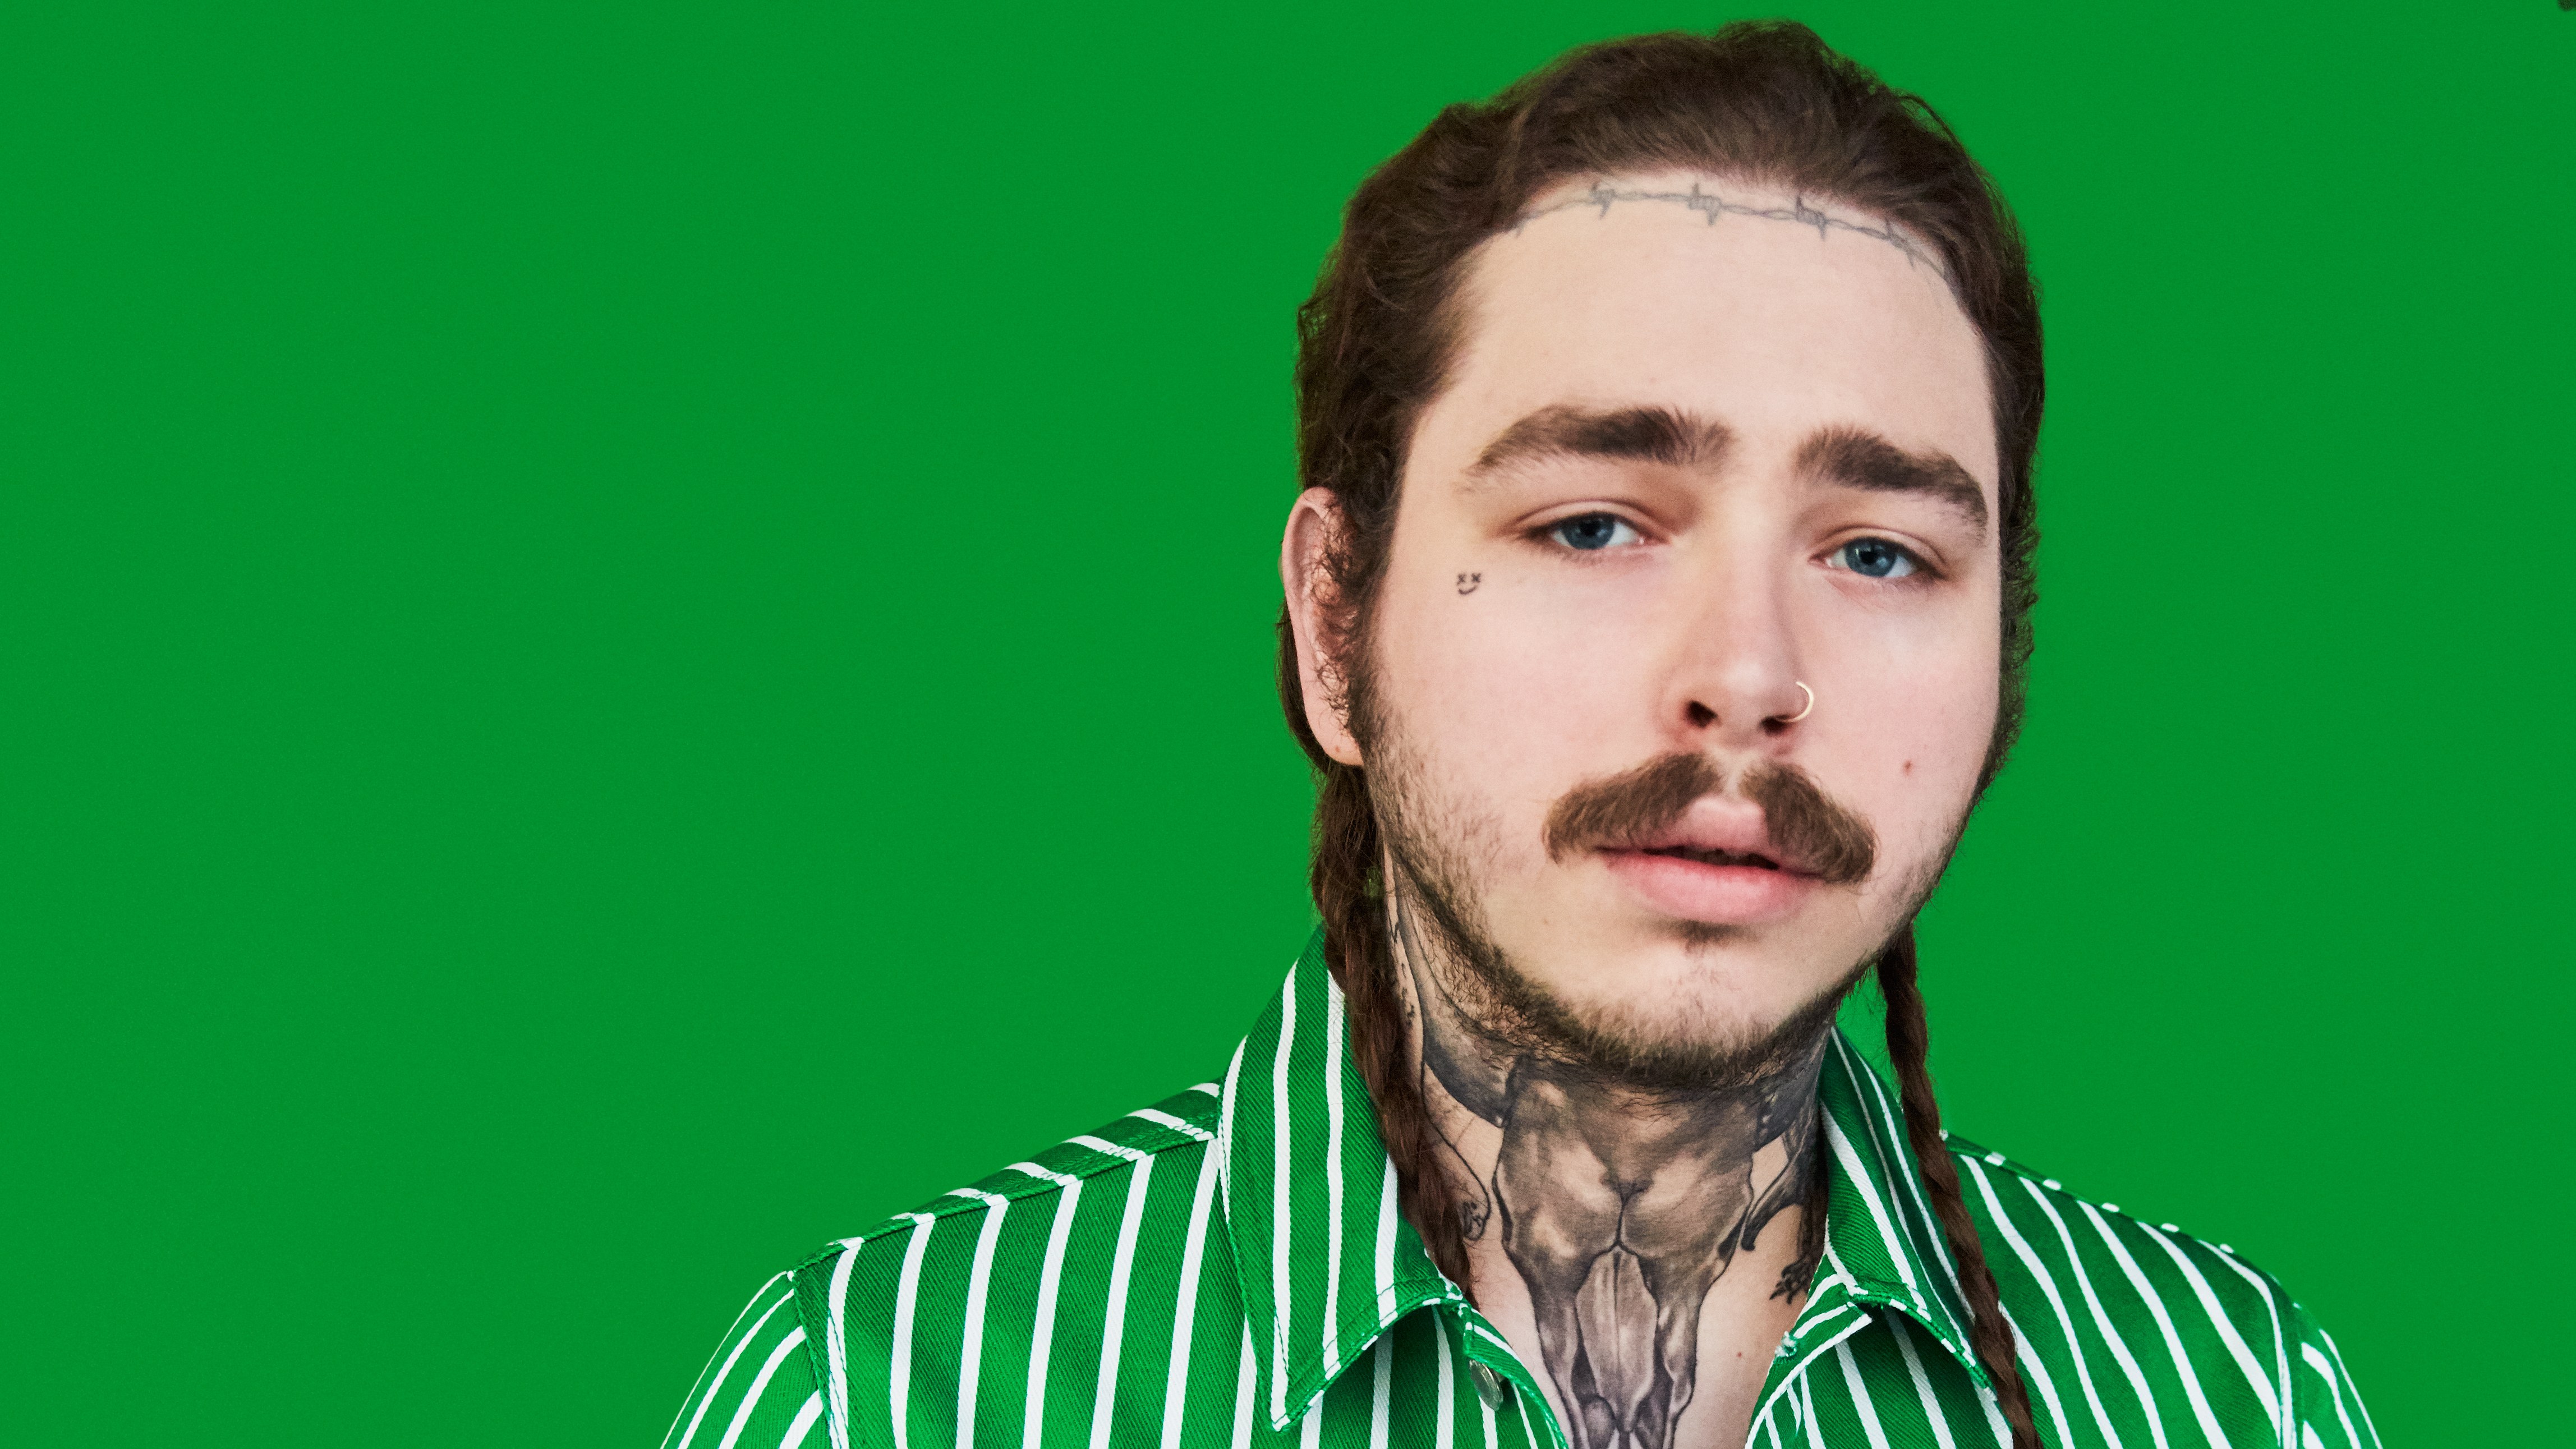 Post Malone Wallpaper and Background Image